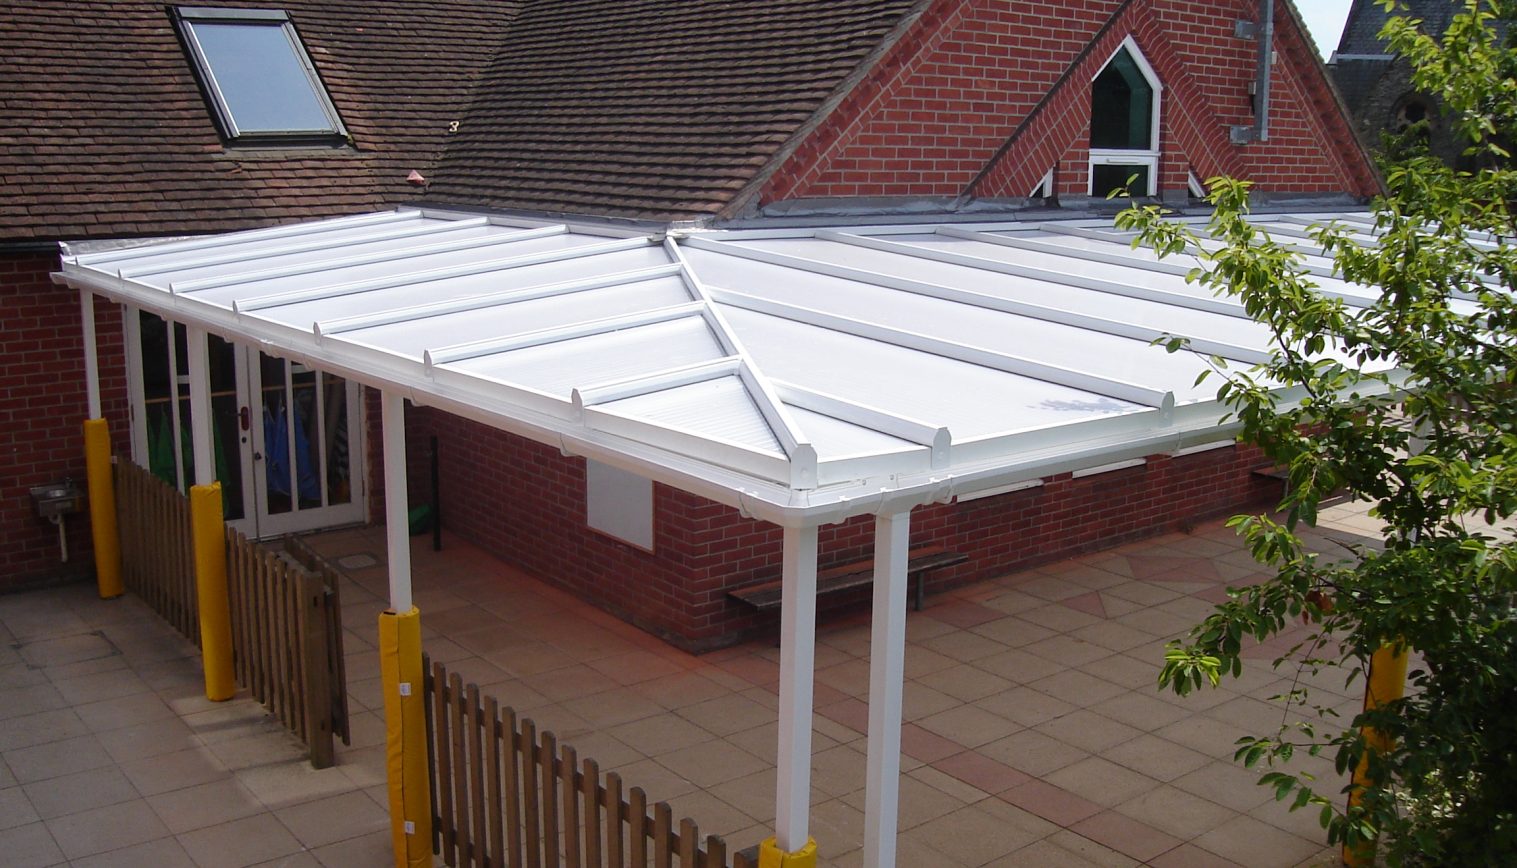 St Gregory CEVC Primary School – Wall Mounted Canopy